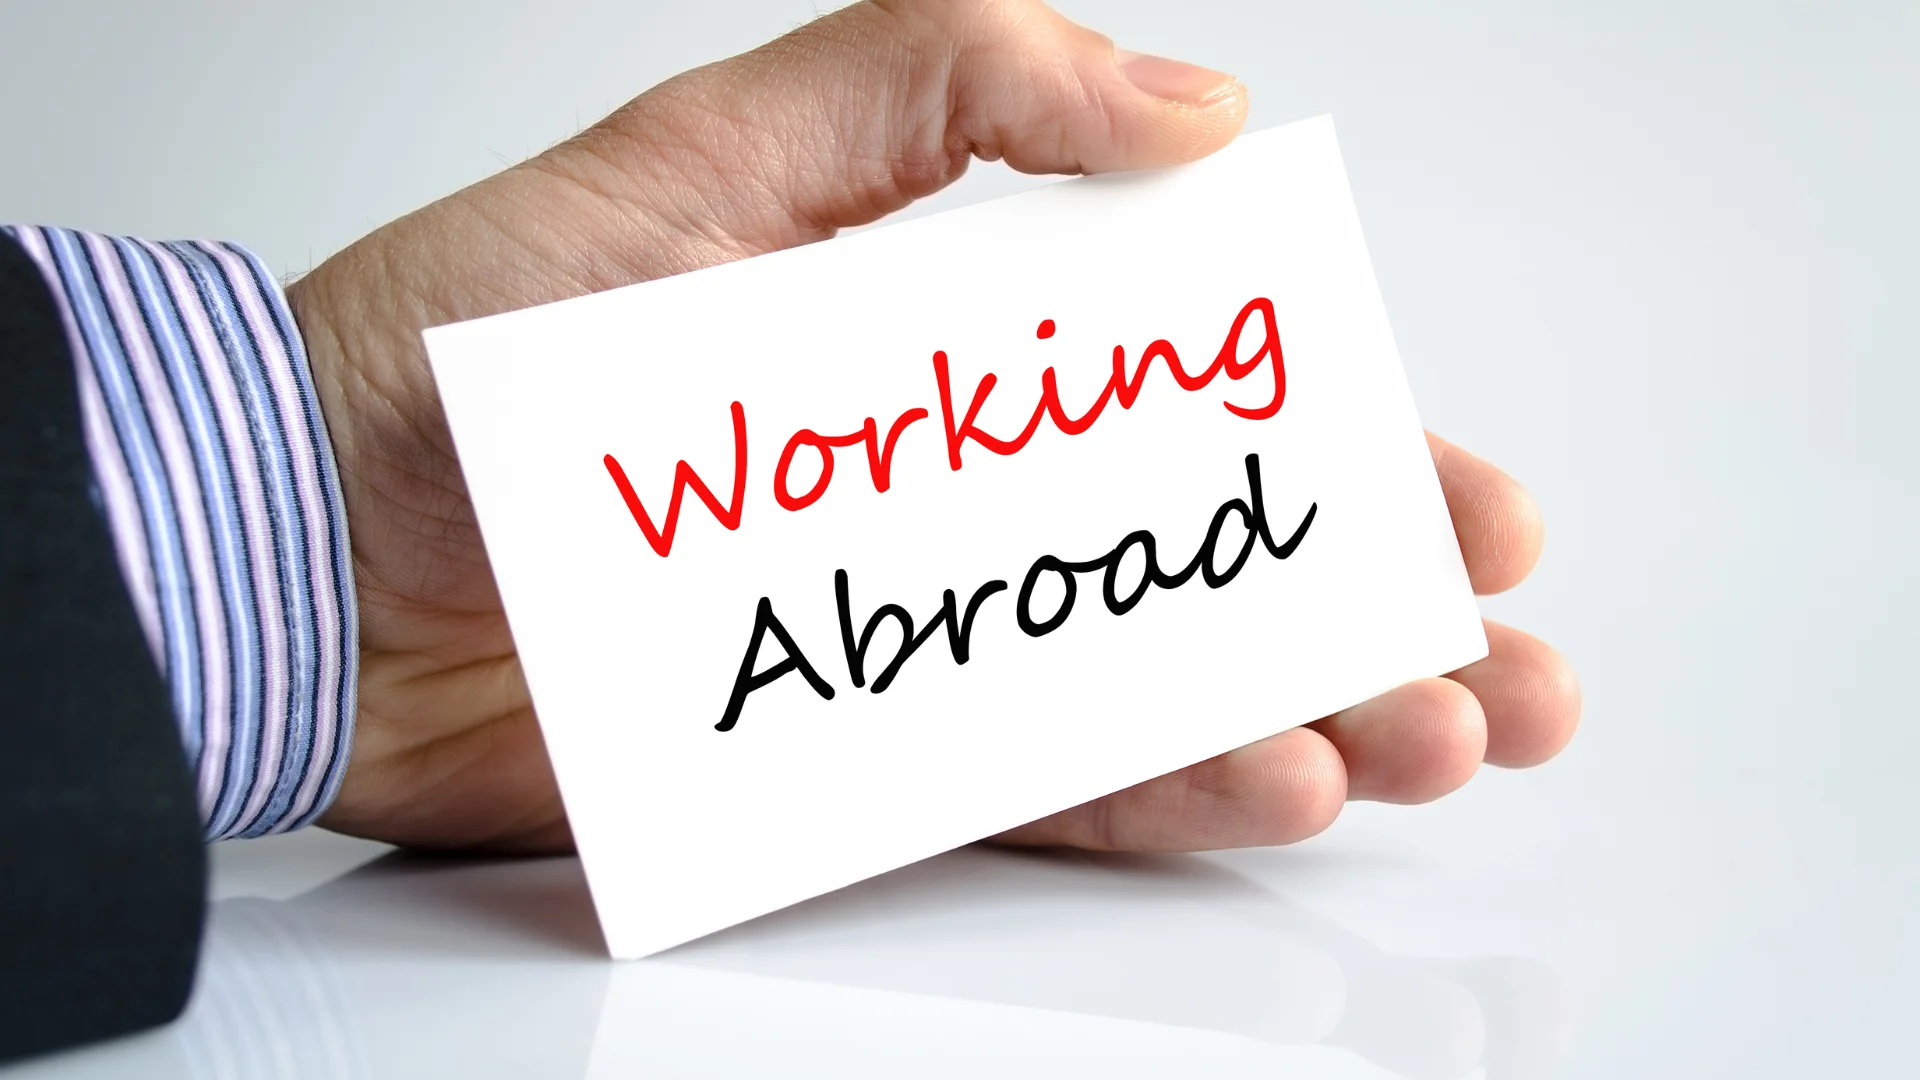 Before relocating abroad, you should evaluate your current circumstances and investigate your professional prospects, political environment, and housing options in the country you want to relocate to. 